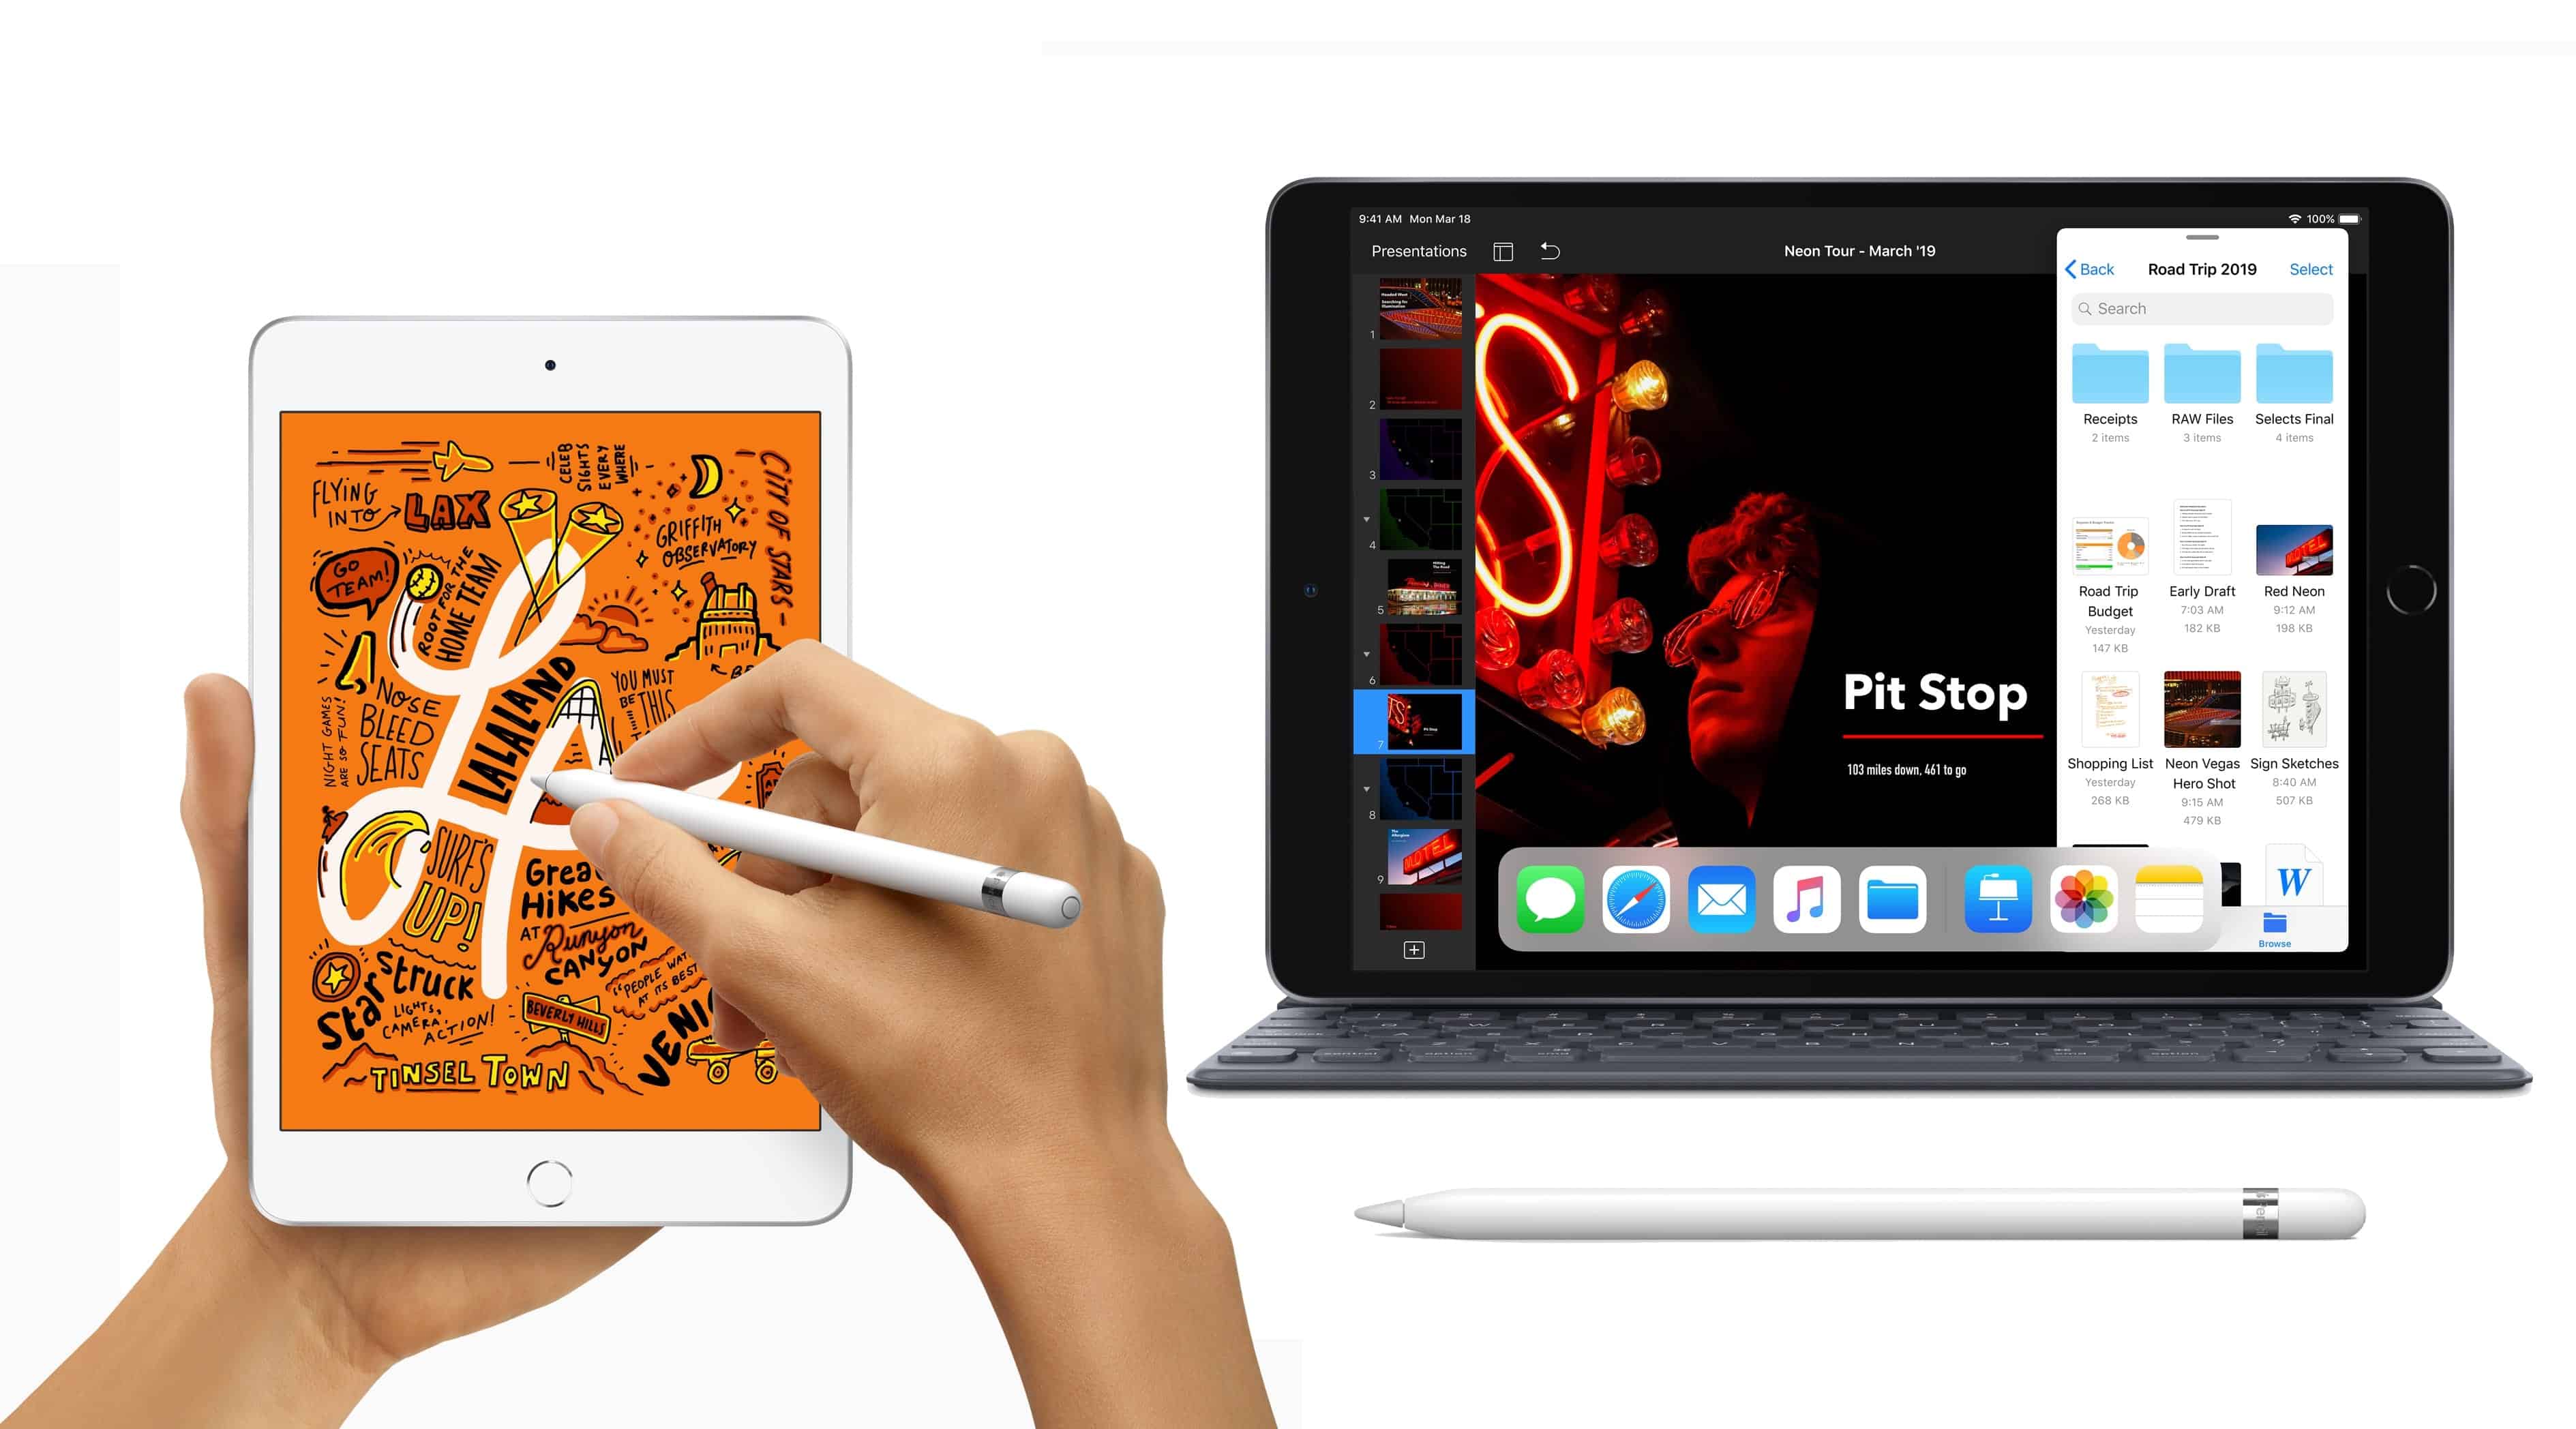 Apple Releases New iPad mini, iPad Air with Apple Pencil Support